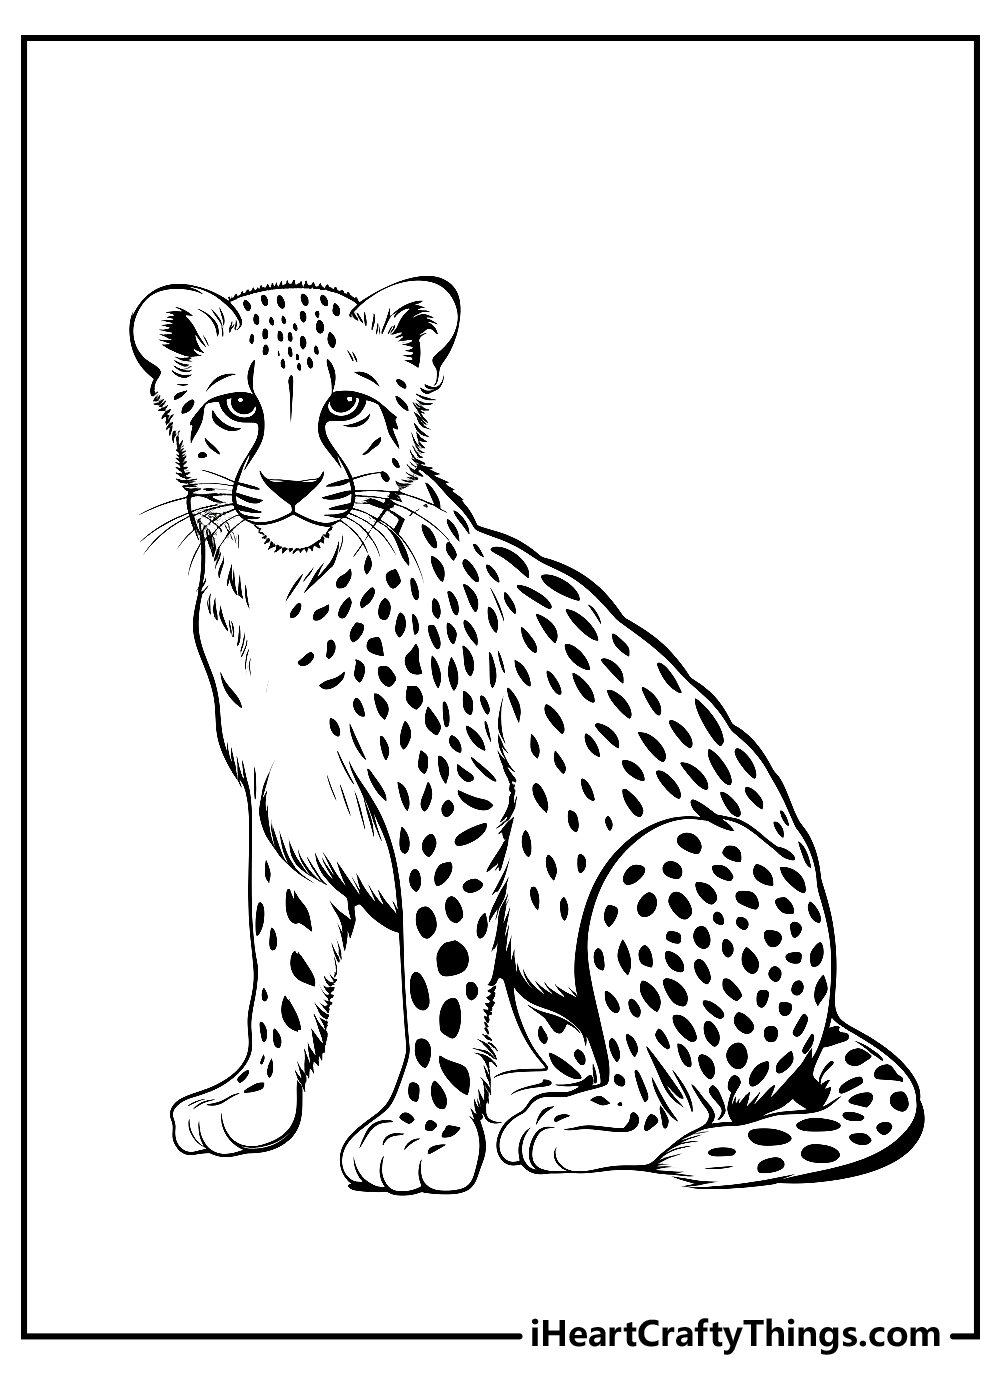 cheetah coloring pages for adults